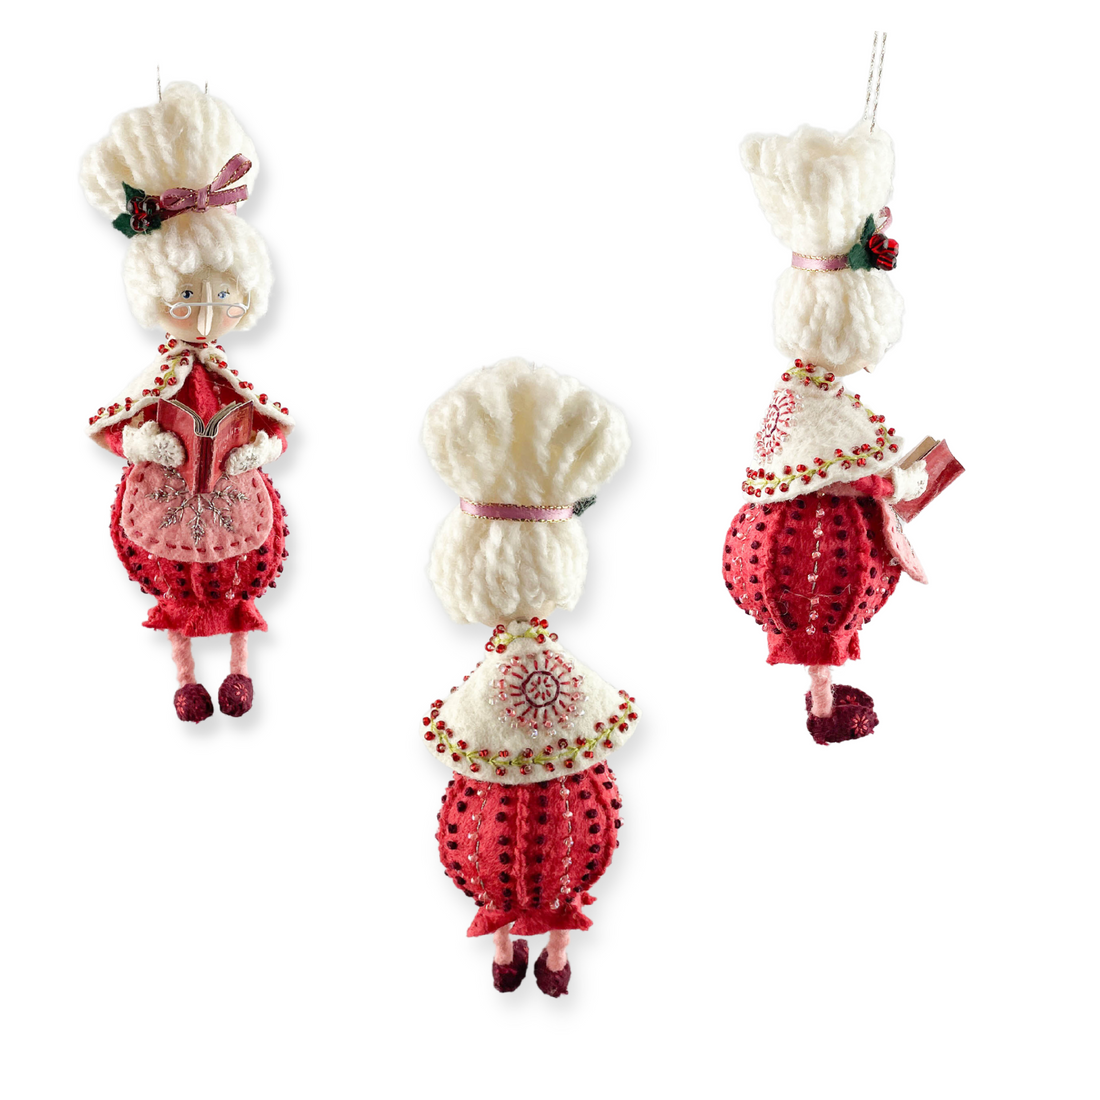 Whimsical Mrs. Claus Ornament Craft Kit Poinsettia Red